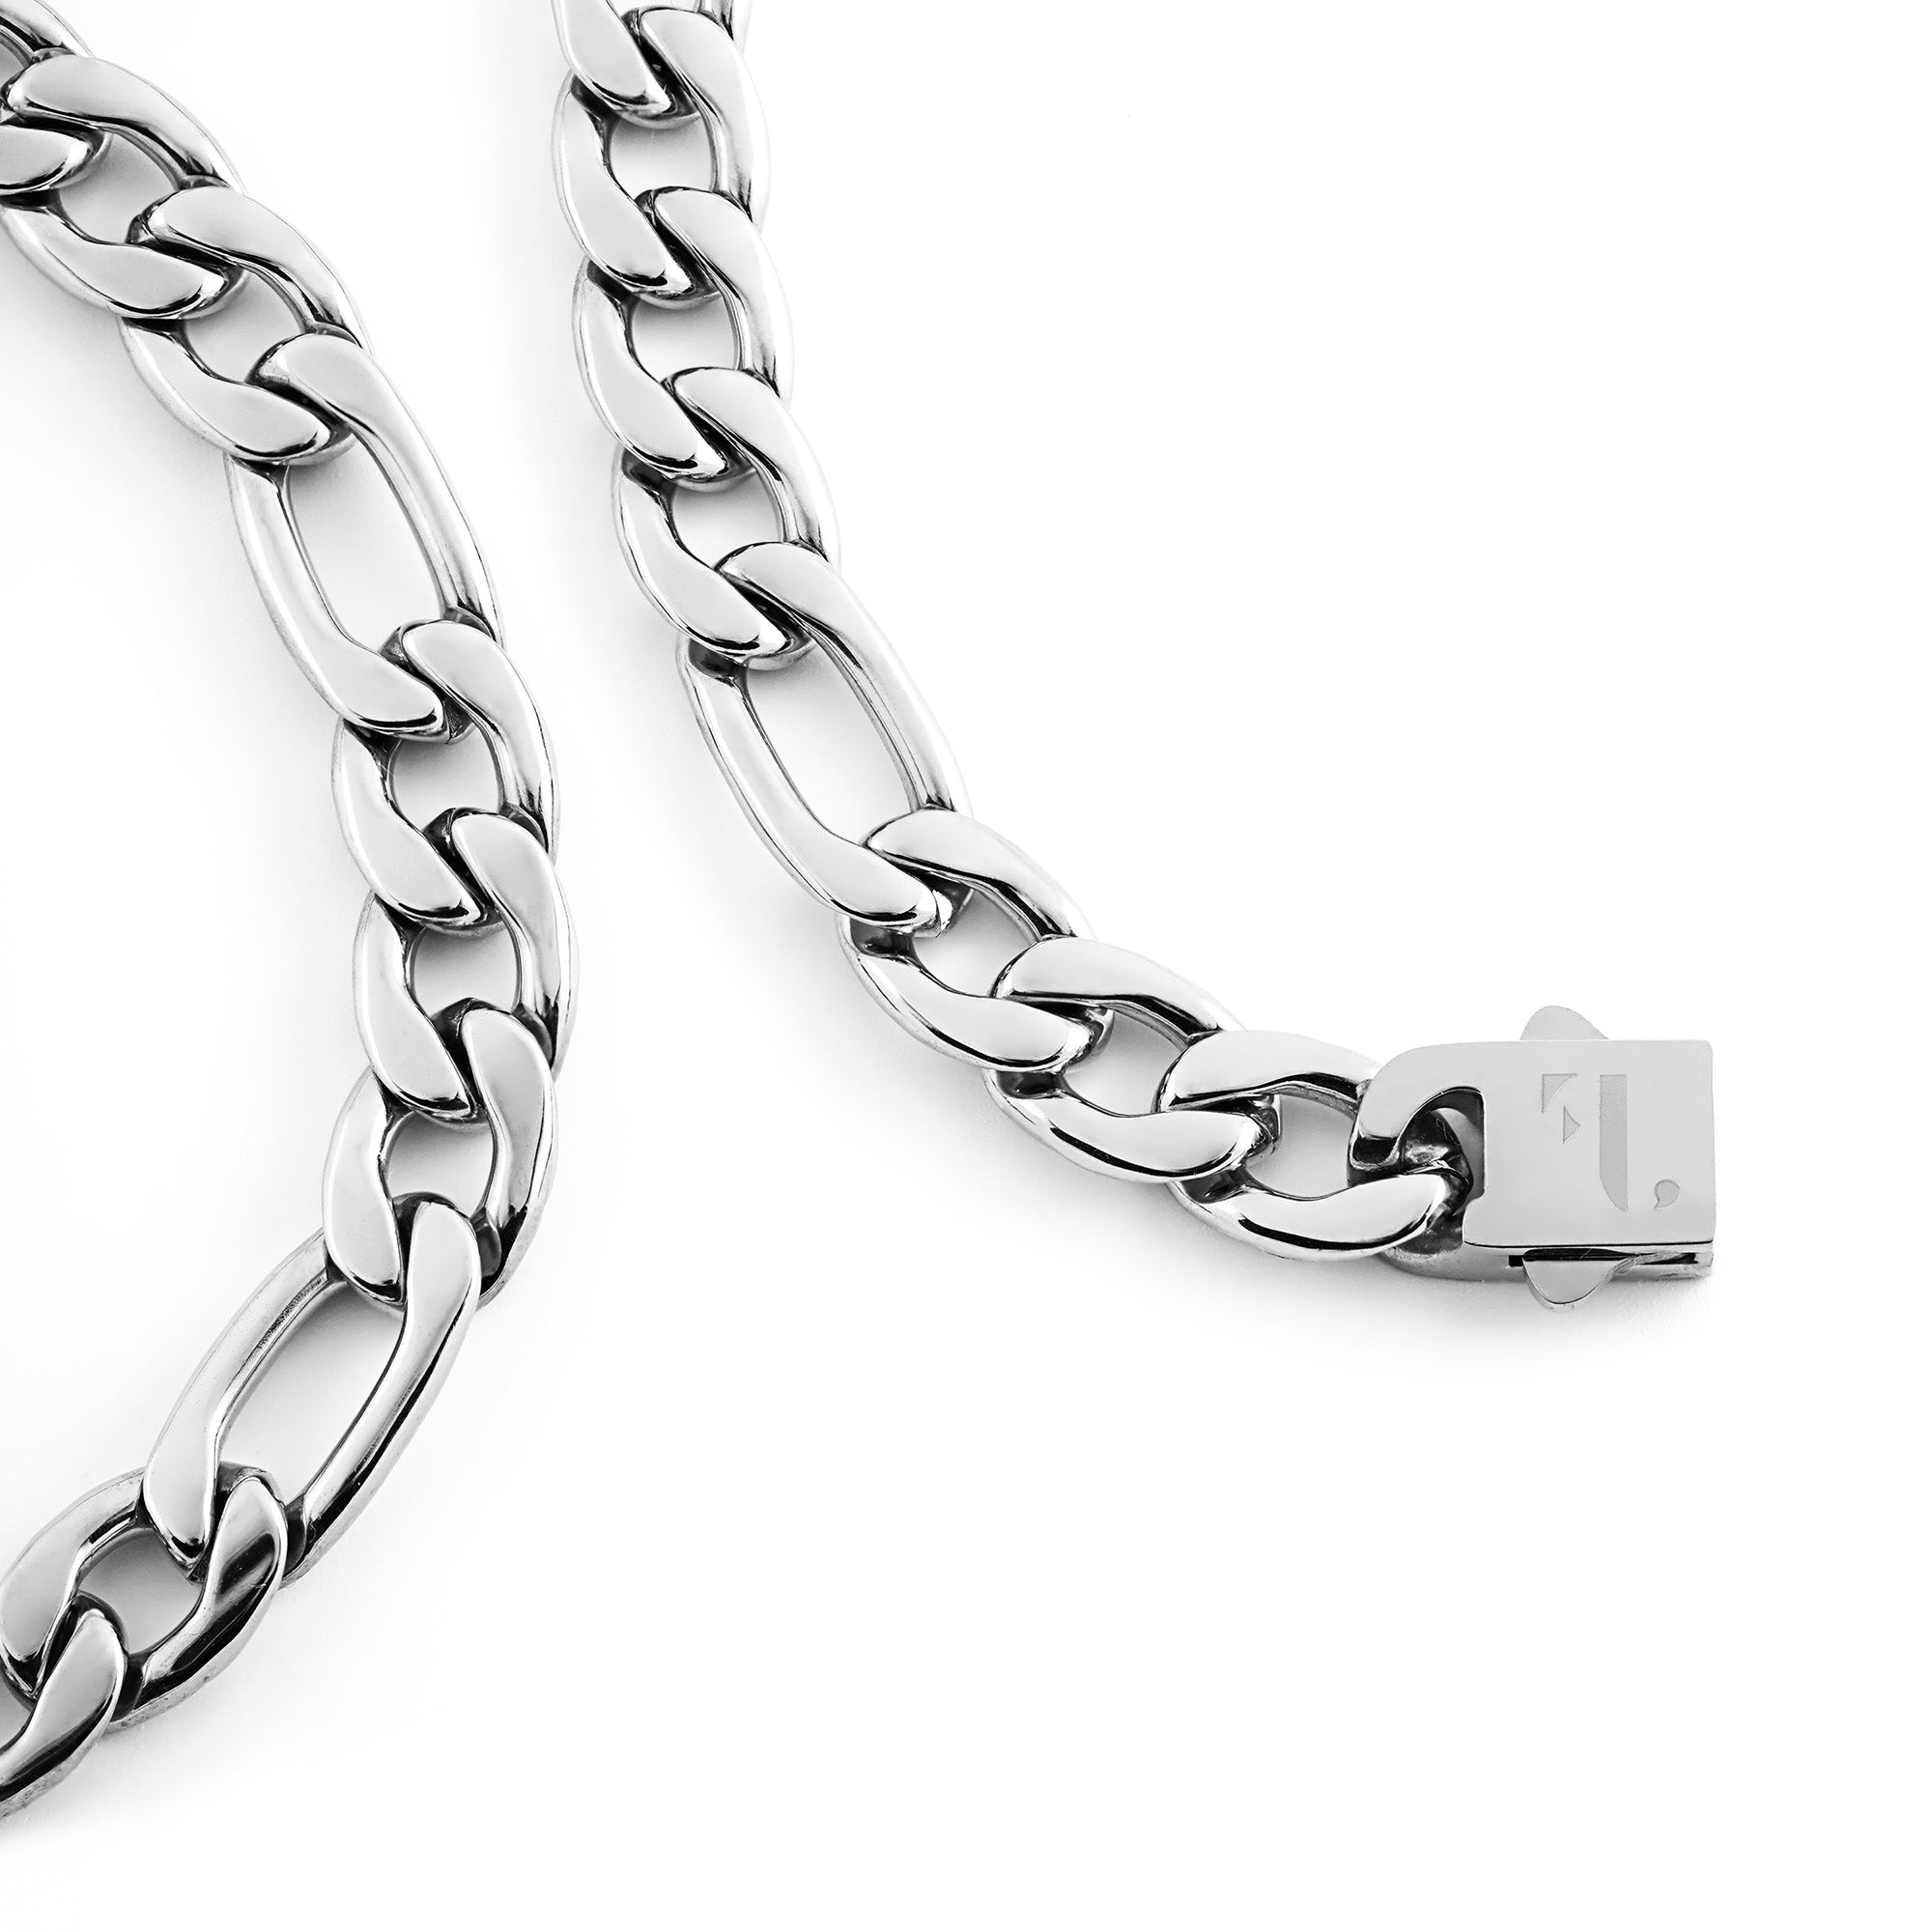 Berg women's necklace by Five Jwlry, featuring a bold 9mm smooth figaro chain in silver, made from water-resistant 316L stainless steel. Offered in sizes 45cm and 50cm. Hypoallergenic with a 2-year warranty.